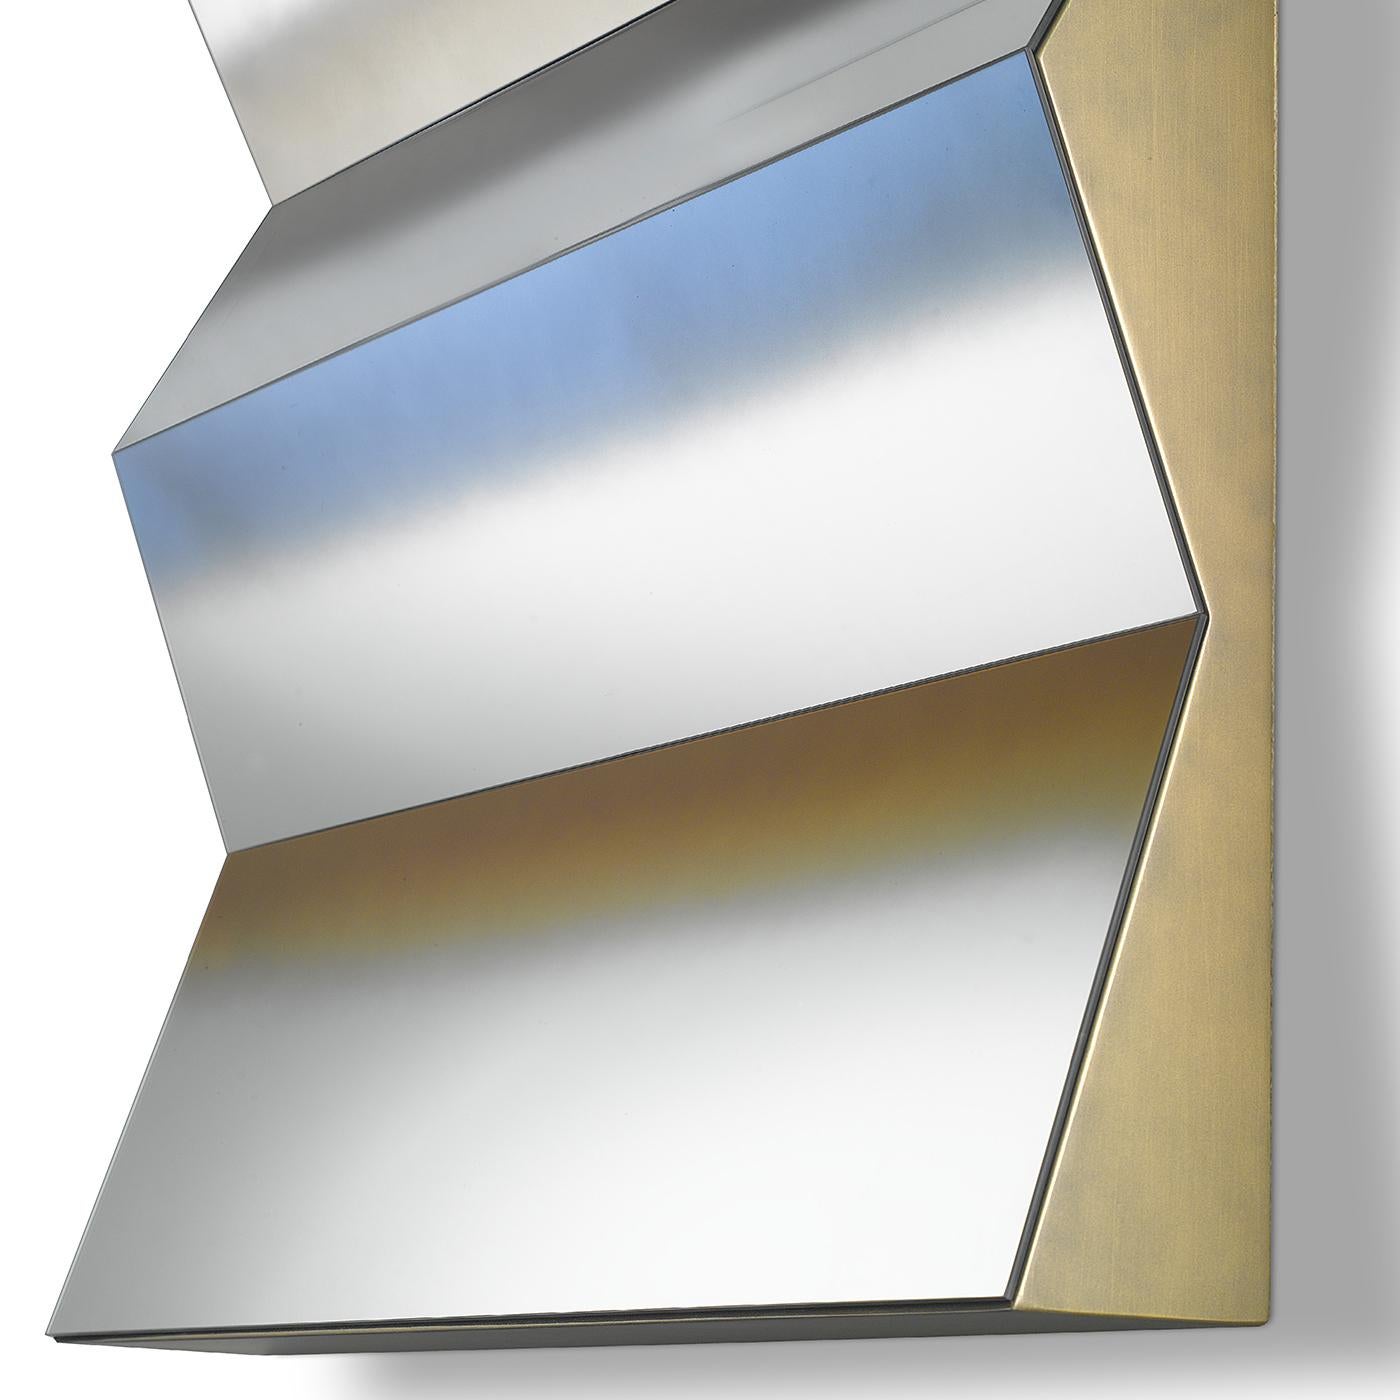 Bright and contemporary design: Caroline mirror is perfect on the wall of any living room or bedroom. The frame is in riace bronze finish wood, while the three-dimensional mirror has shades of bronze, blue and gray. Both the frame and the mirror are